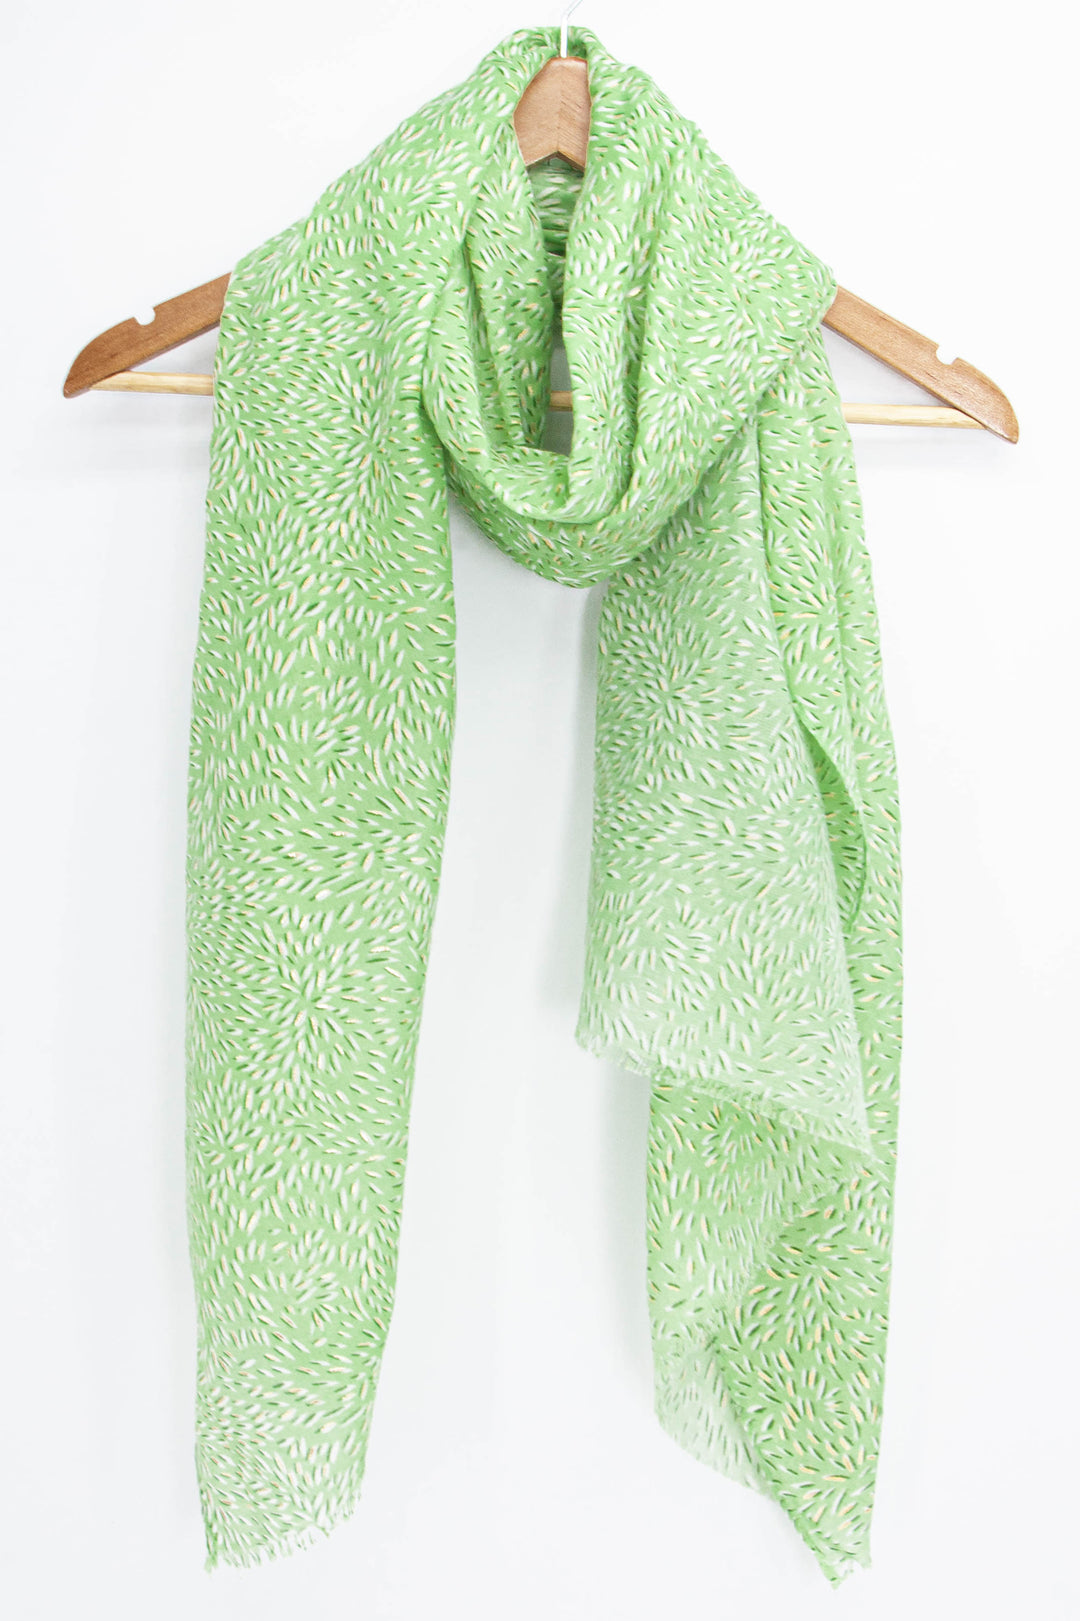 green summer scarf with an all over floral petal pattern draped around a coat hanger